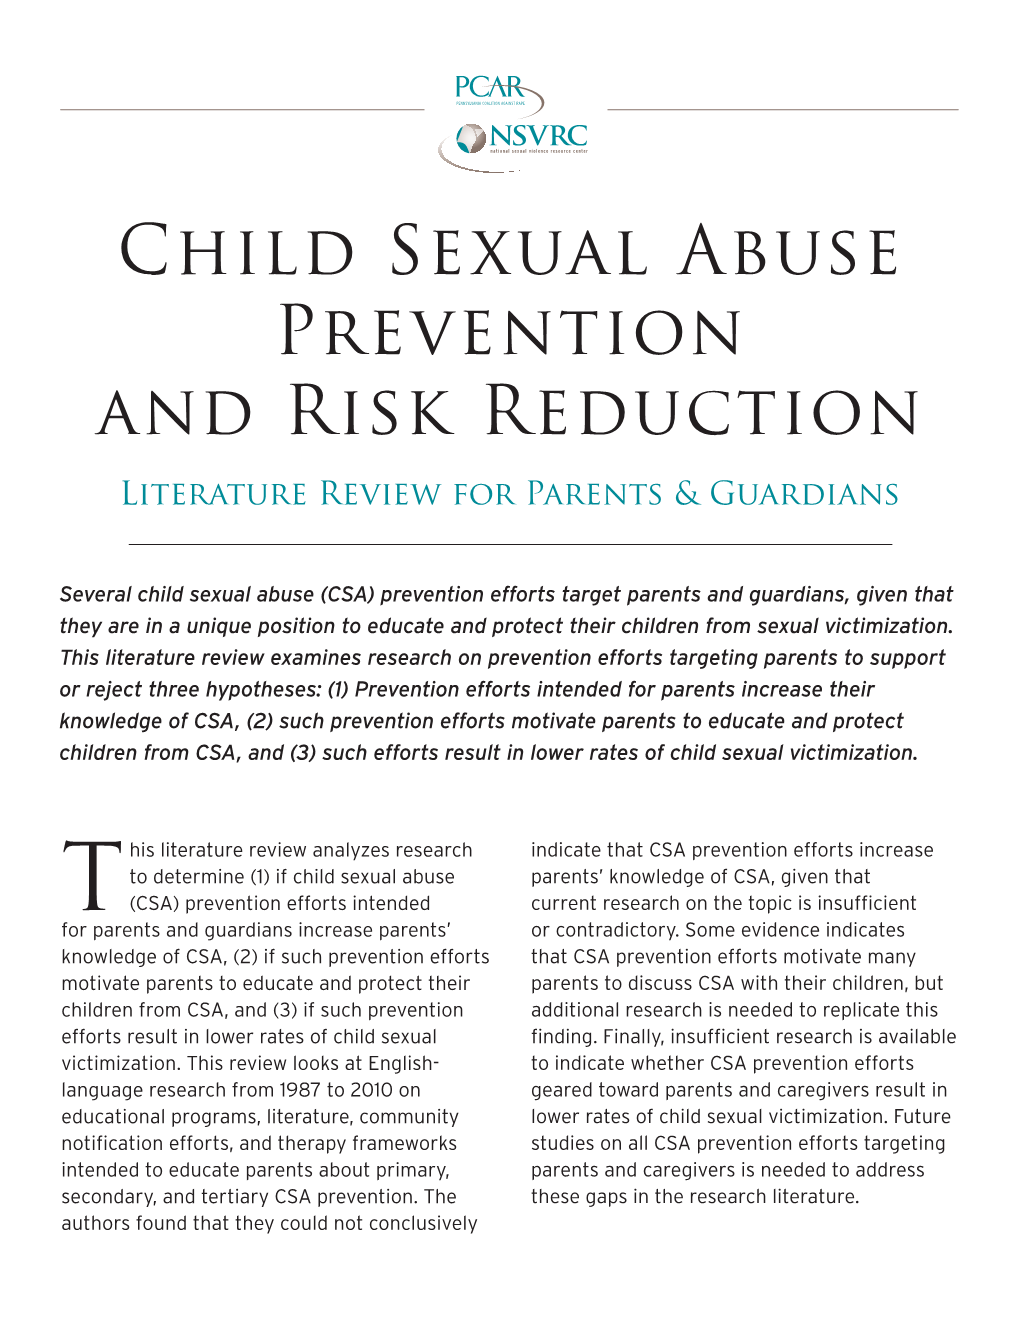 Child Sexual Abuse Prevention and Risk Reduction Literature Review for Parents & Guardians